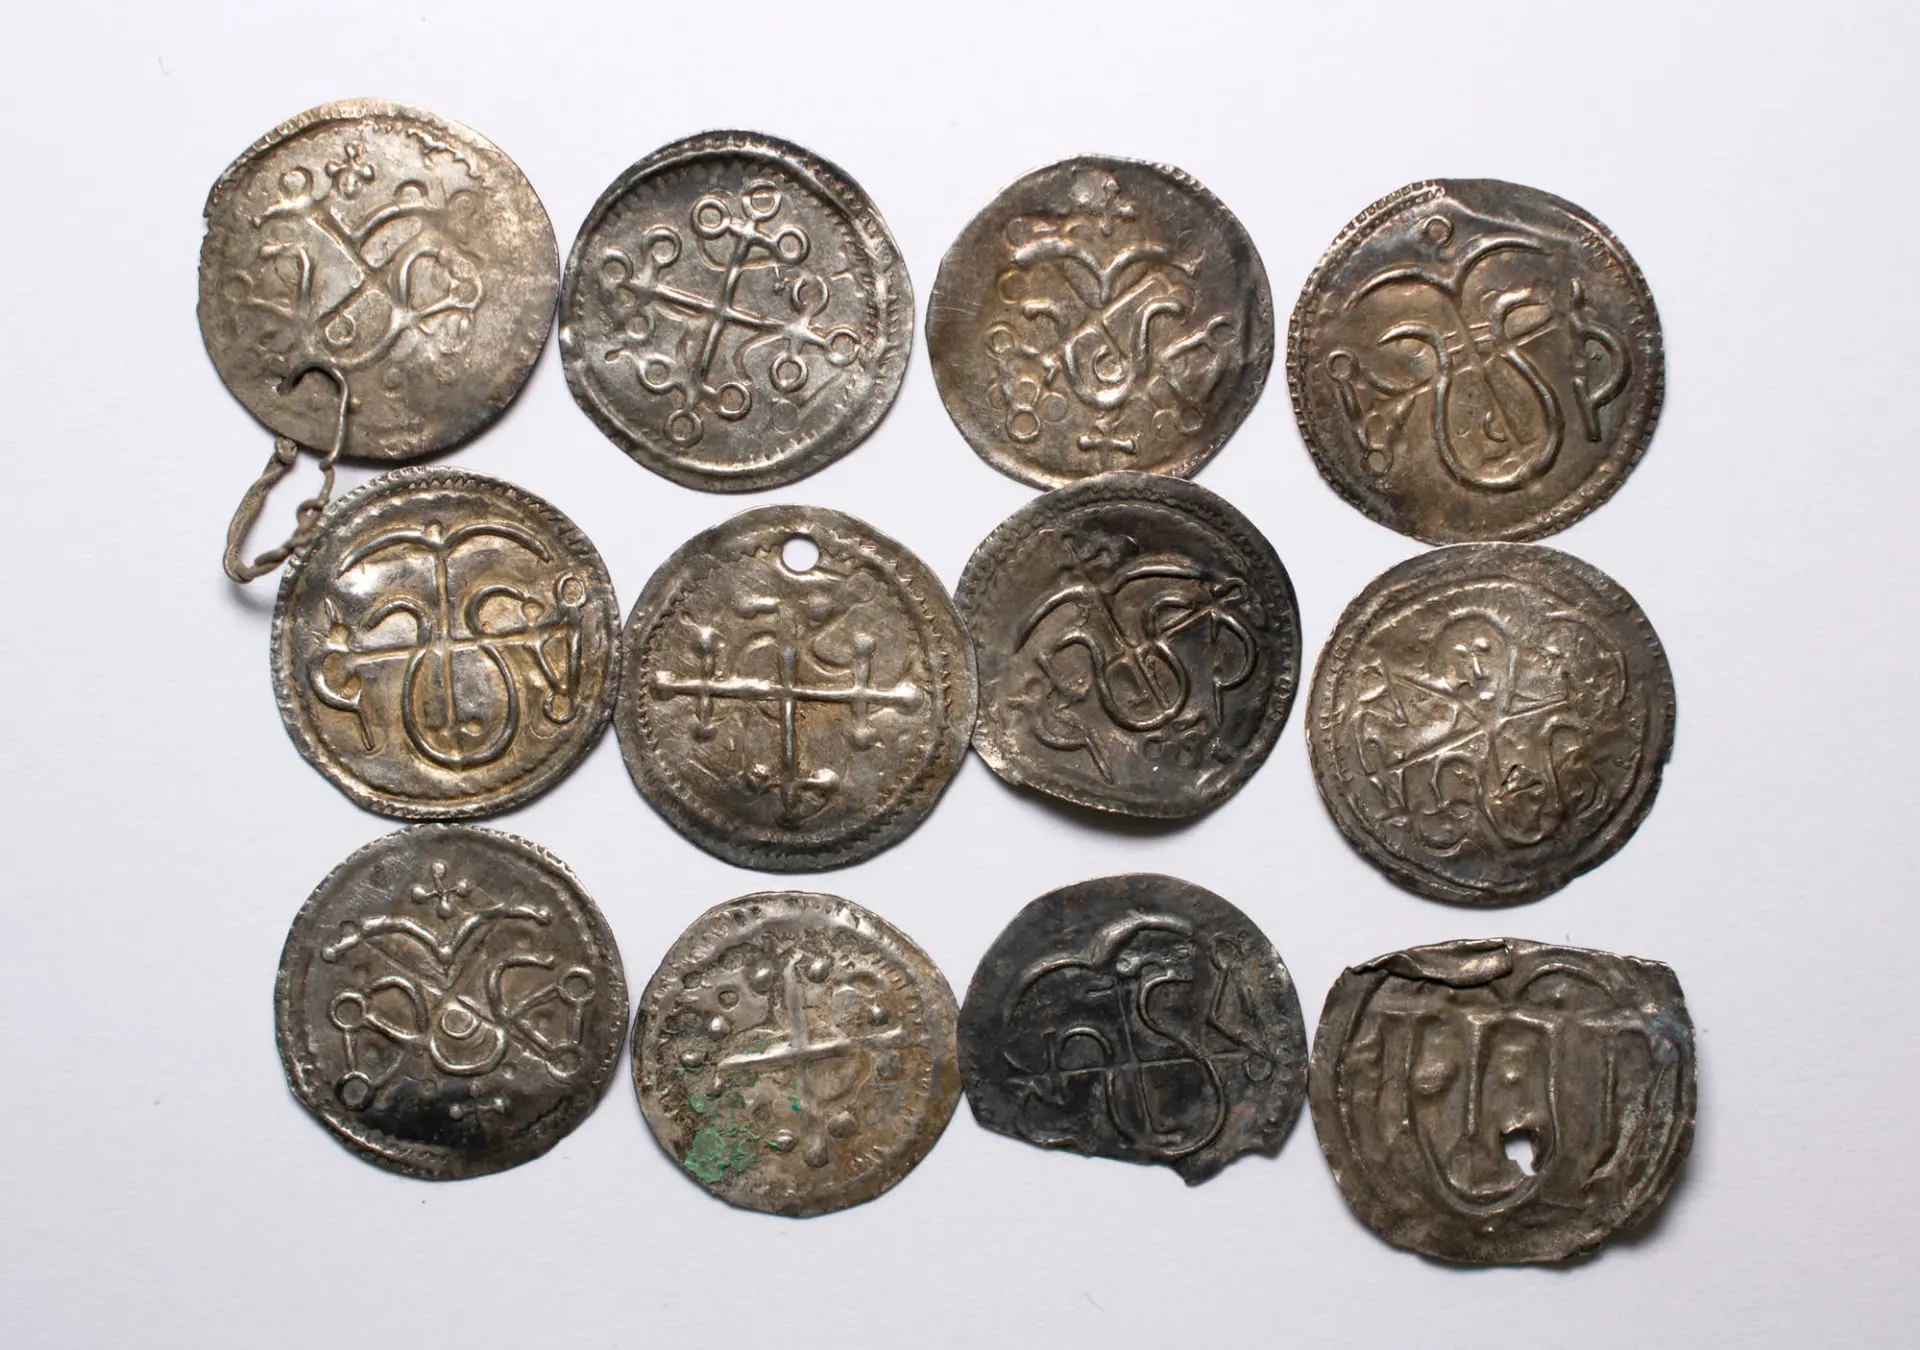 He discovered a cache of Viking silver coins in a field